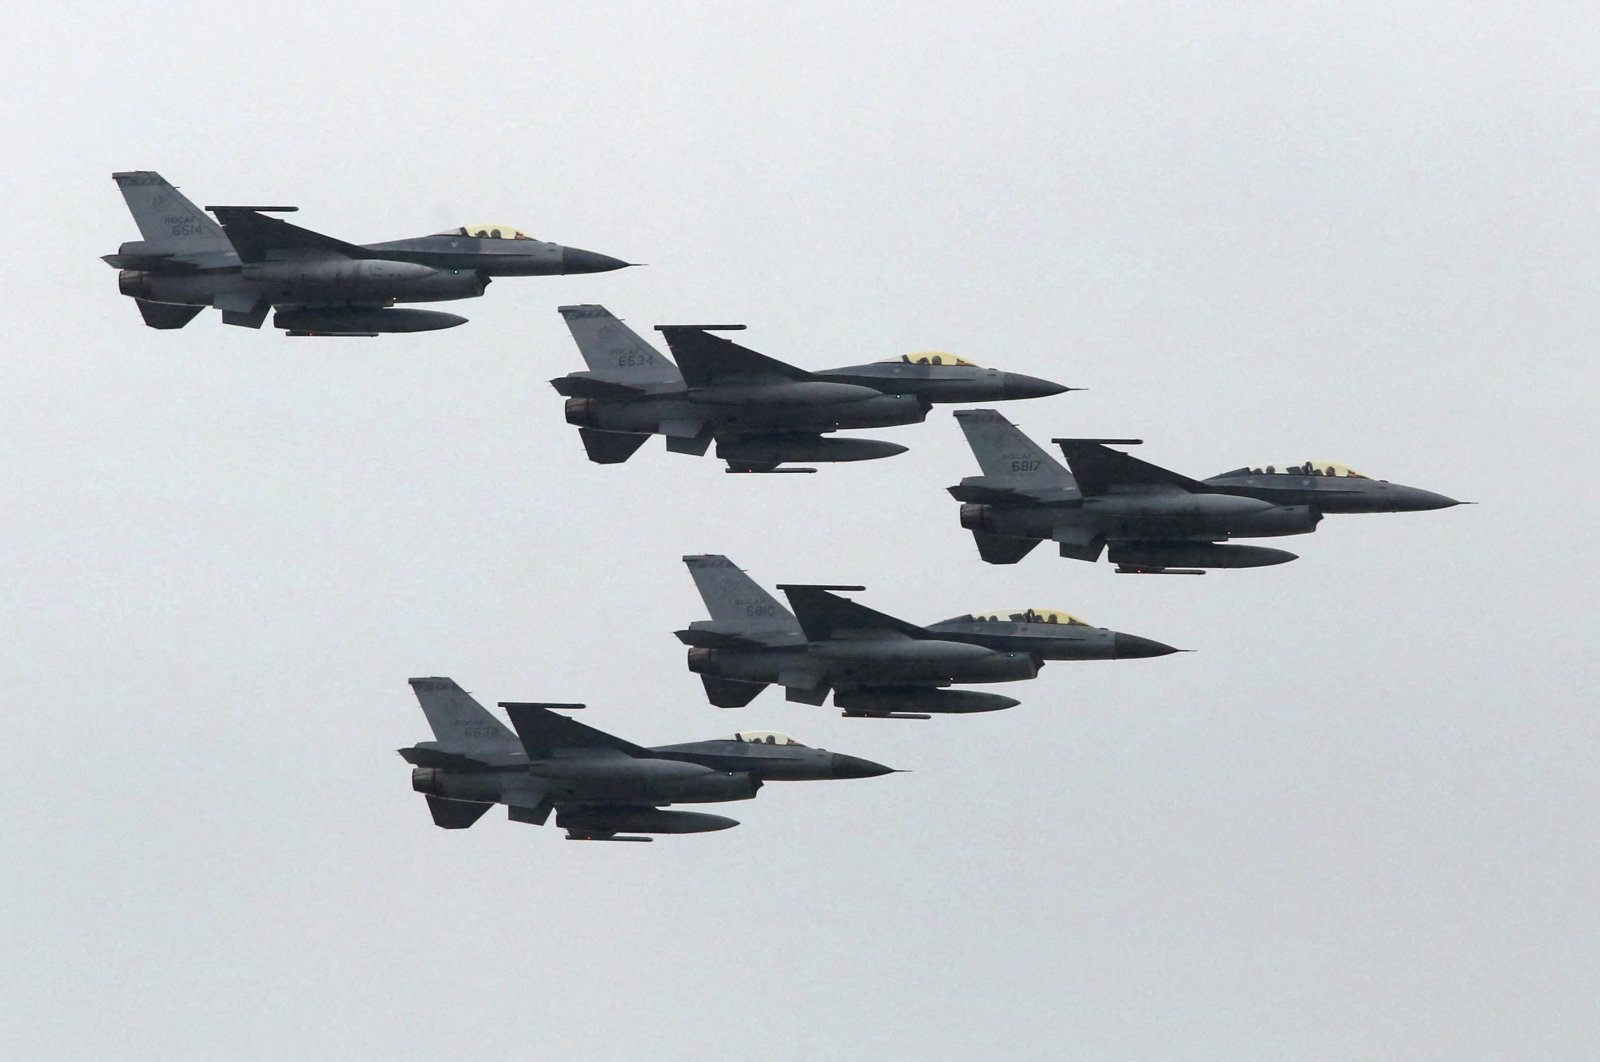 Taiwan Air Force&#039;s F-16 fighter jets fly during the annual Han Kuang military exercise at an army base in Hsinchu, northern Taiwan, July 4, 2015. (Reuters Photo)